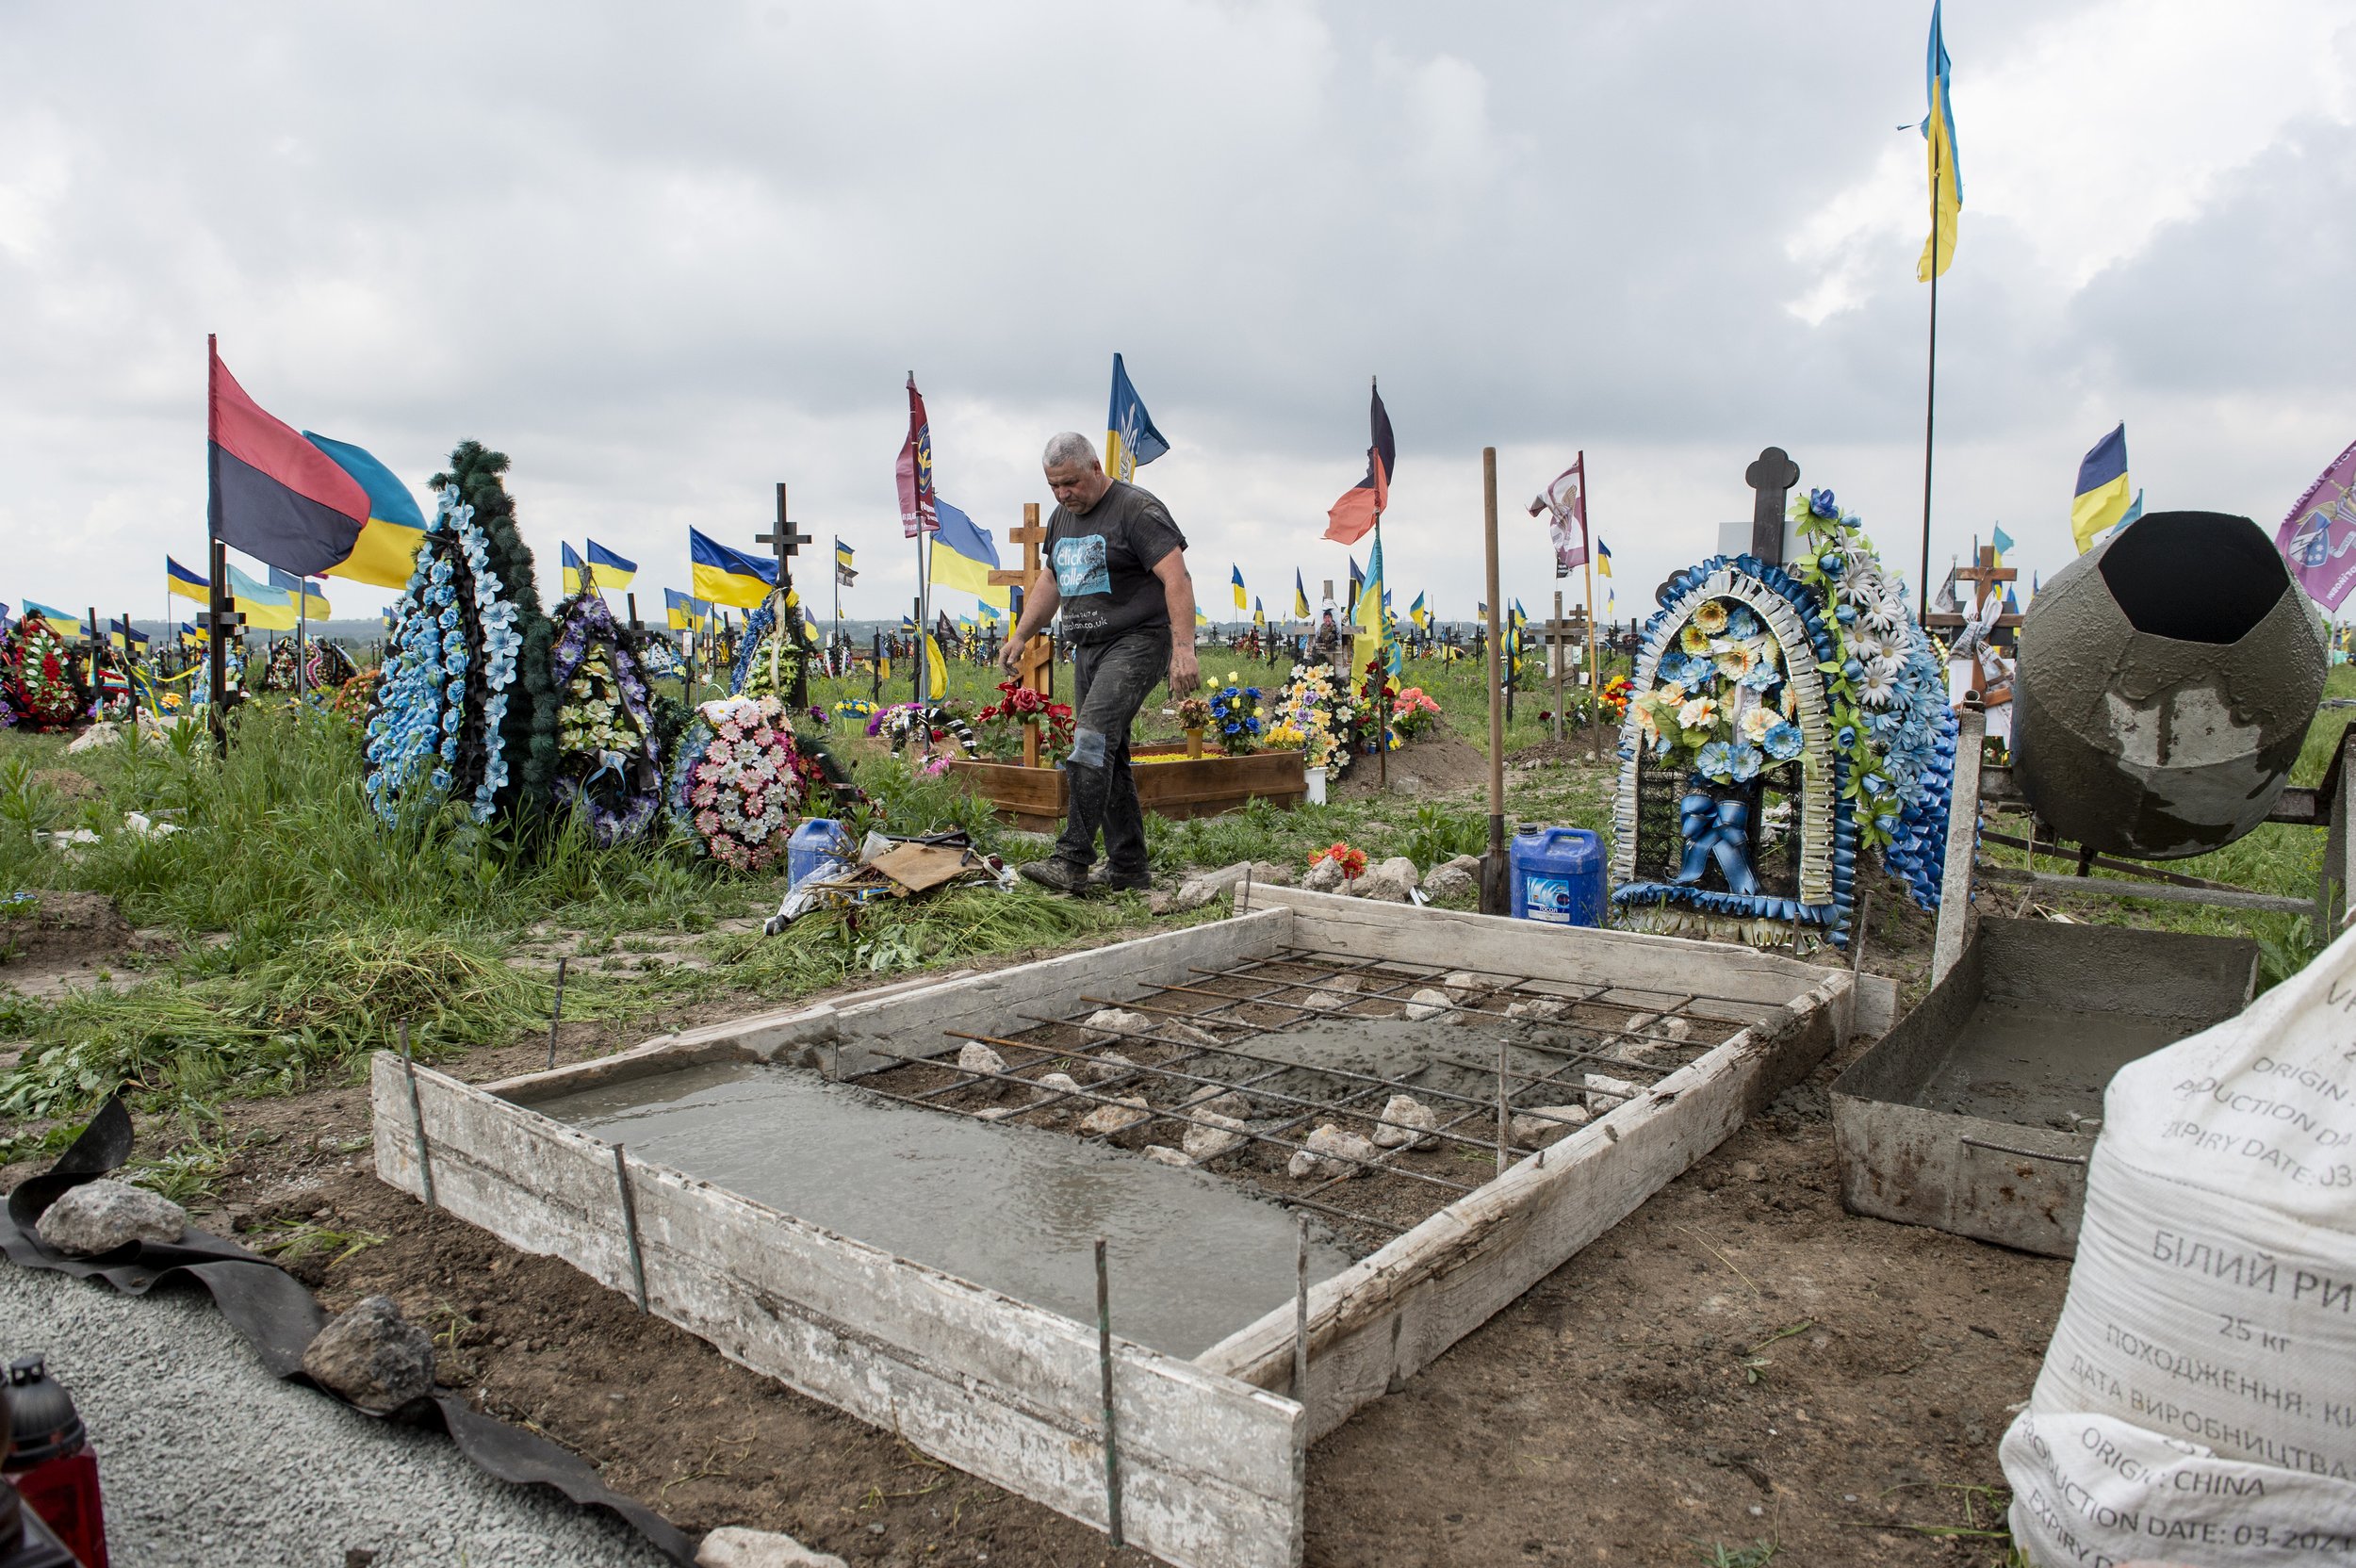  A grave is constructed in a military graveyard in Dnipro, Ukraine on May 27, 2023. A year into Russia’s invasion of Ukraine every community in Ukraine has experienced the pain of loss and war, both Russia and Ukraine keep their casualty figures secr